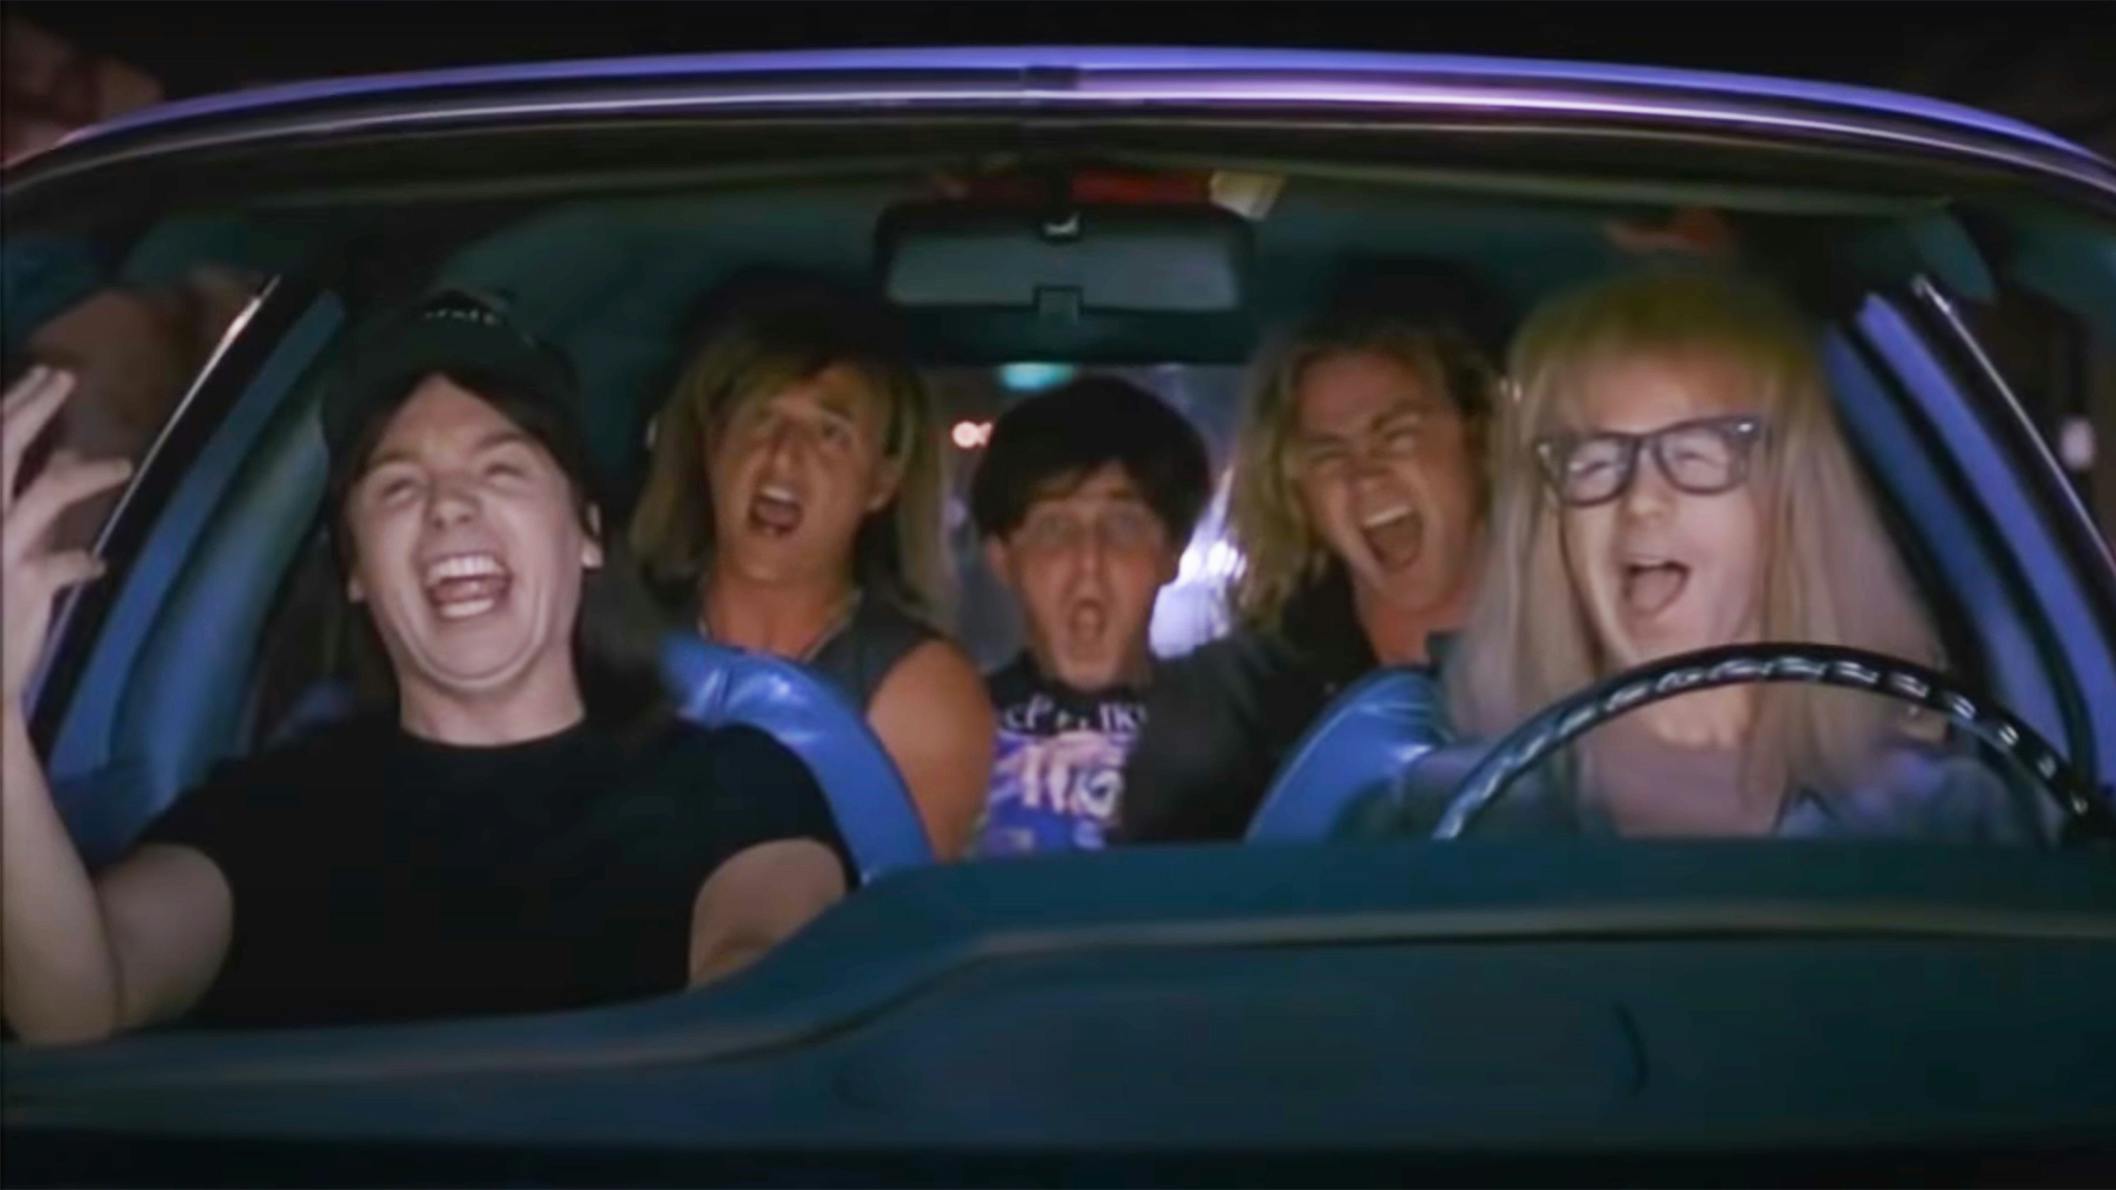 30 years on, Wayne’s World is still the greatest rock movie ever made